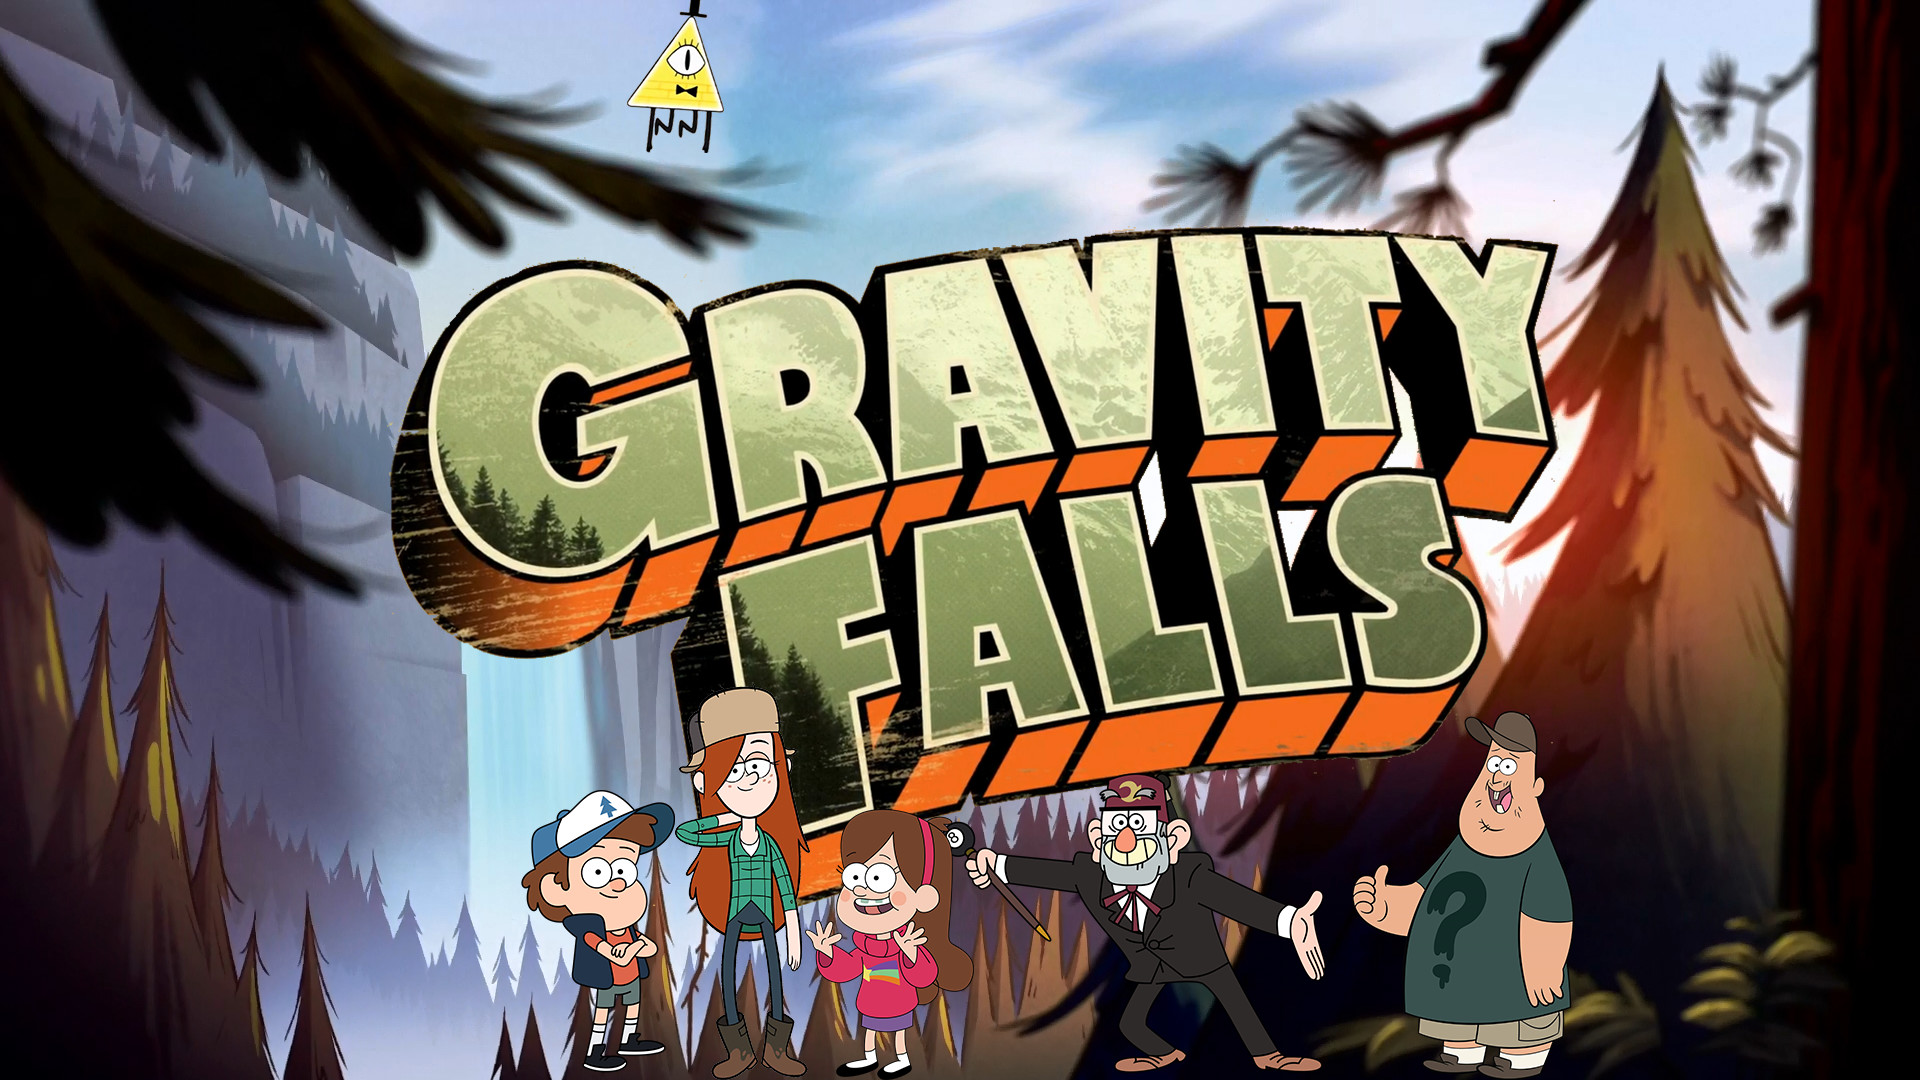 1920x1080 Gravity Falls Eyes Coub GIFs with sound